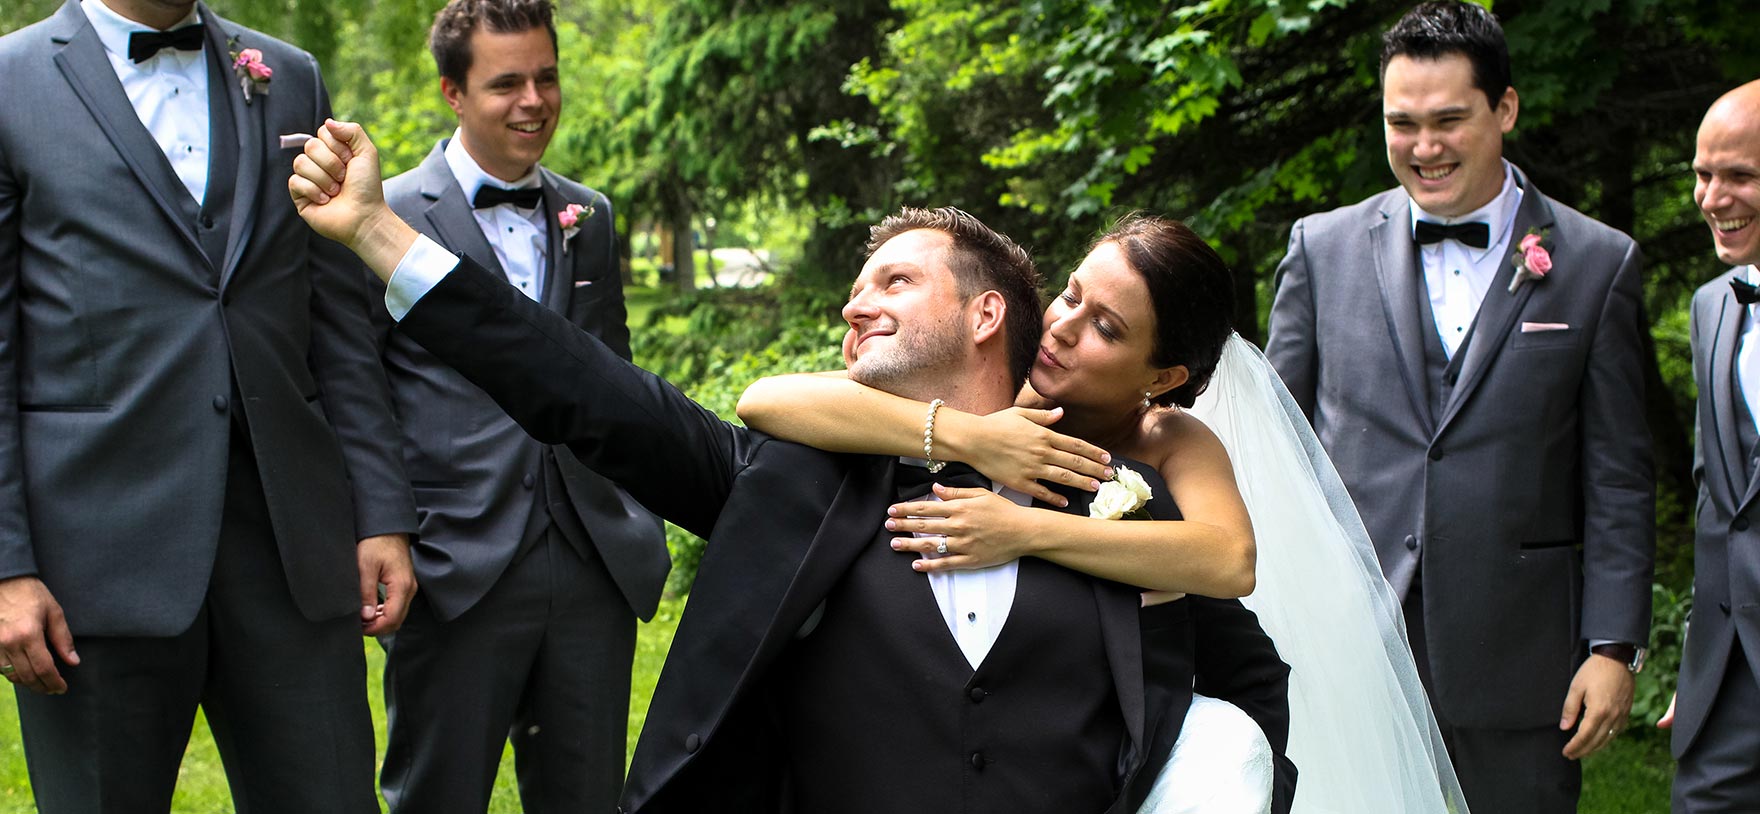 Image of groom pumping his fist with groomsmen & bride for Quotacy blog The Wedding Gift Every Couple Should Give Each Other.